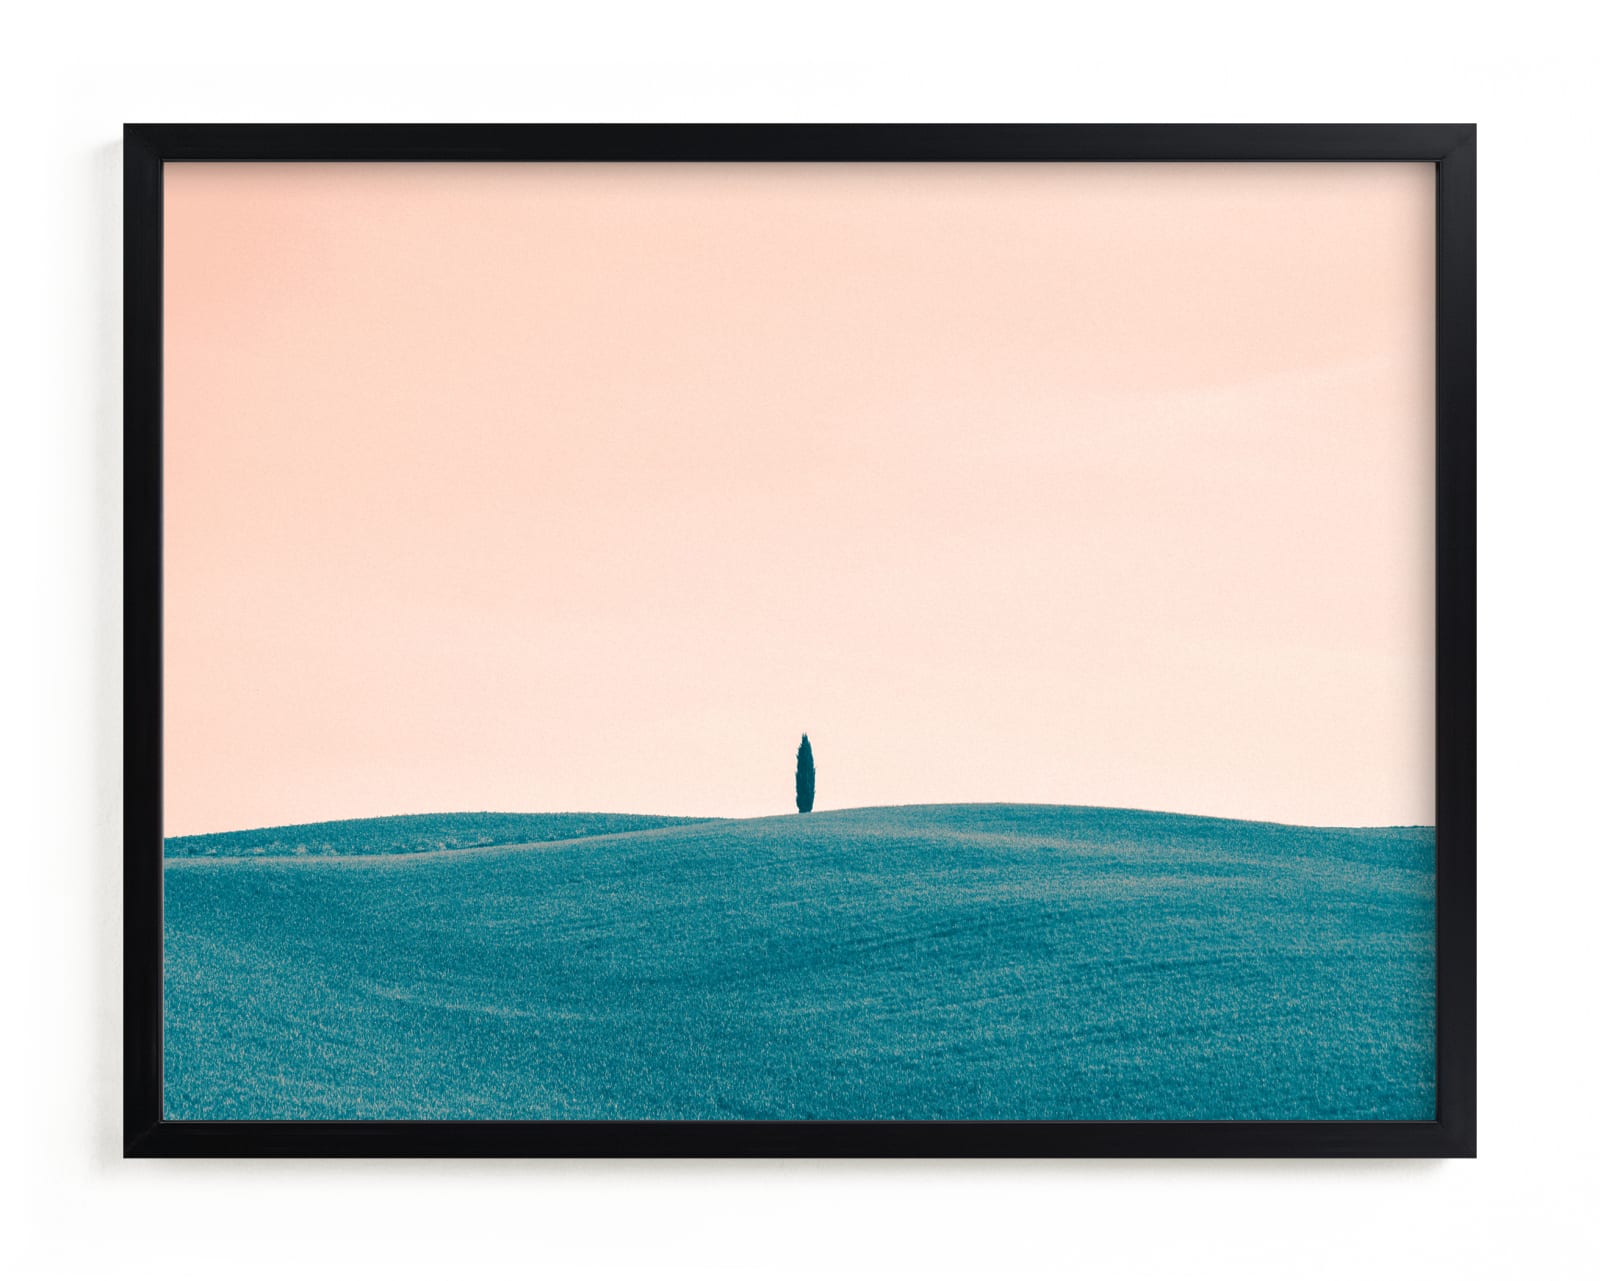 "Tuscan Hills 01" - Limited Edition Art Print by Kelsey Mucci in beautiful frame options and a variety of sizes.